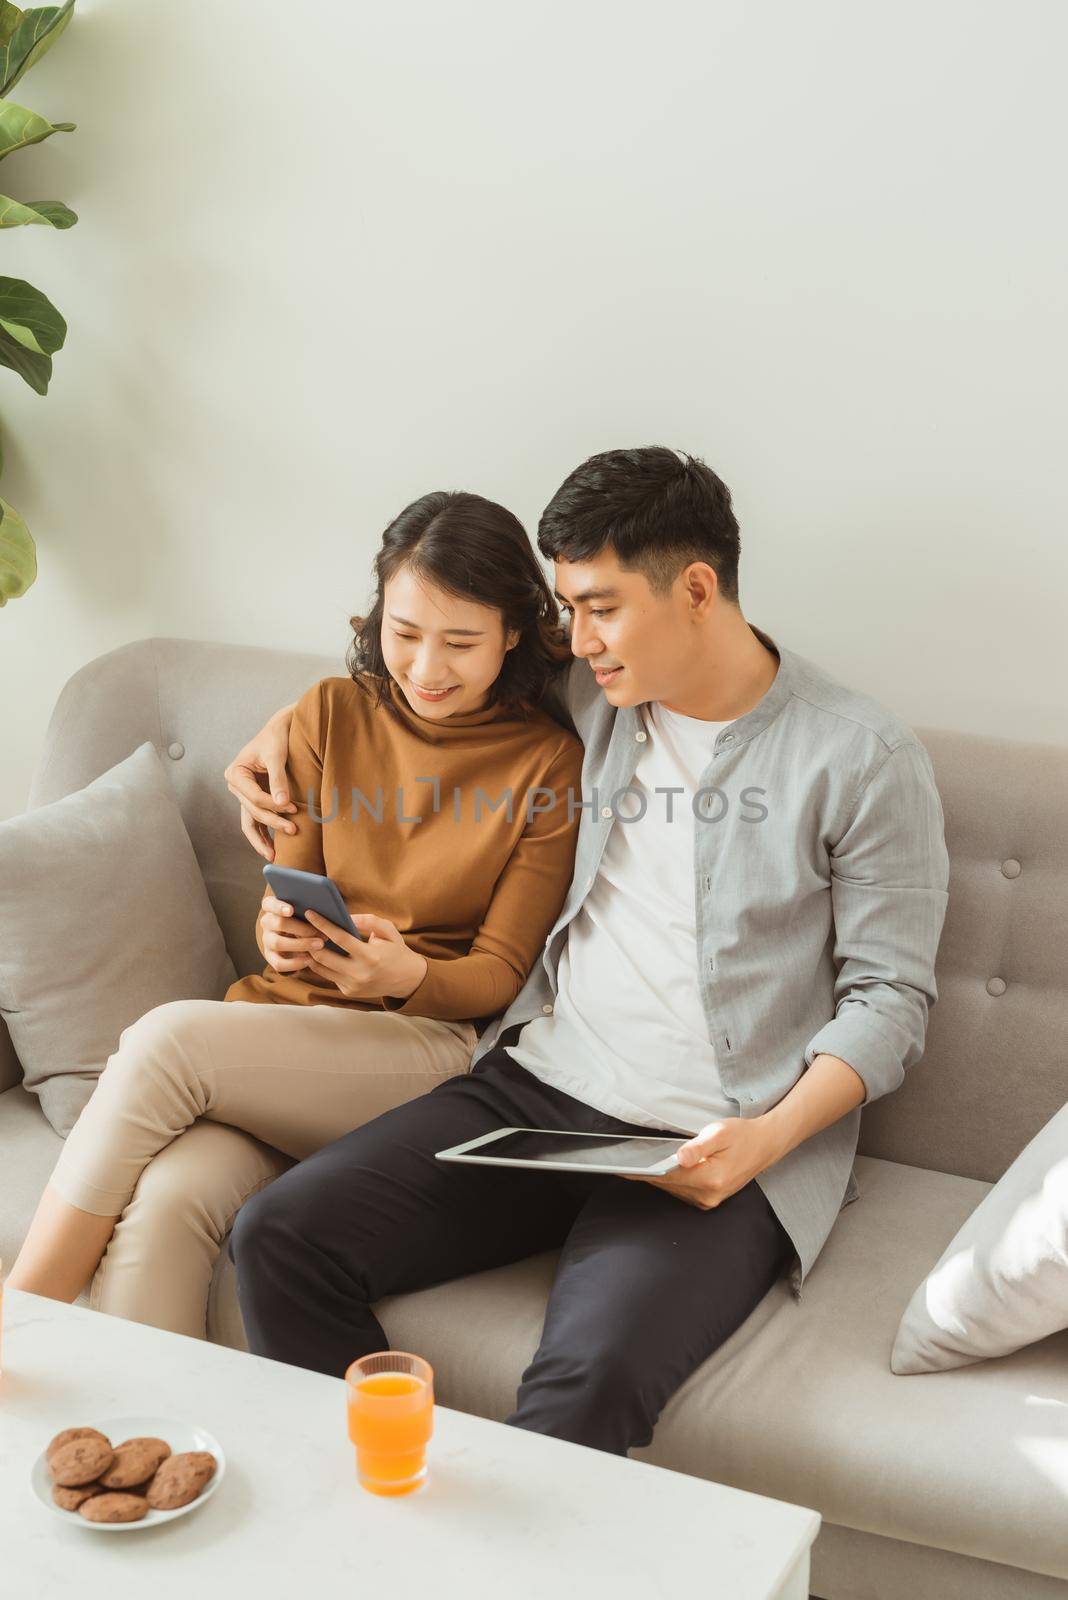 Young couple using a tablet and mobile phone on the couch while enjoying leisure time at home by makidotvn